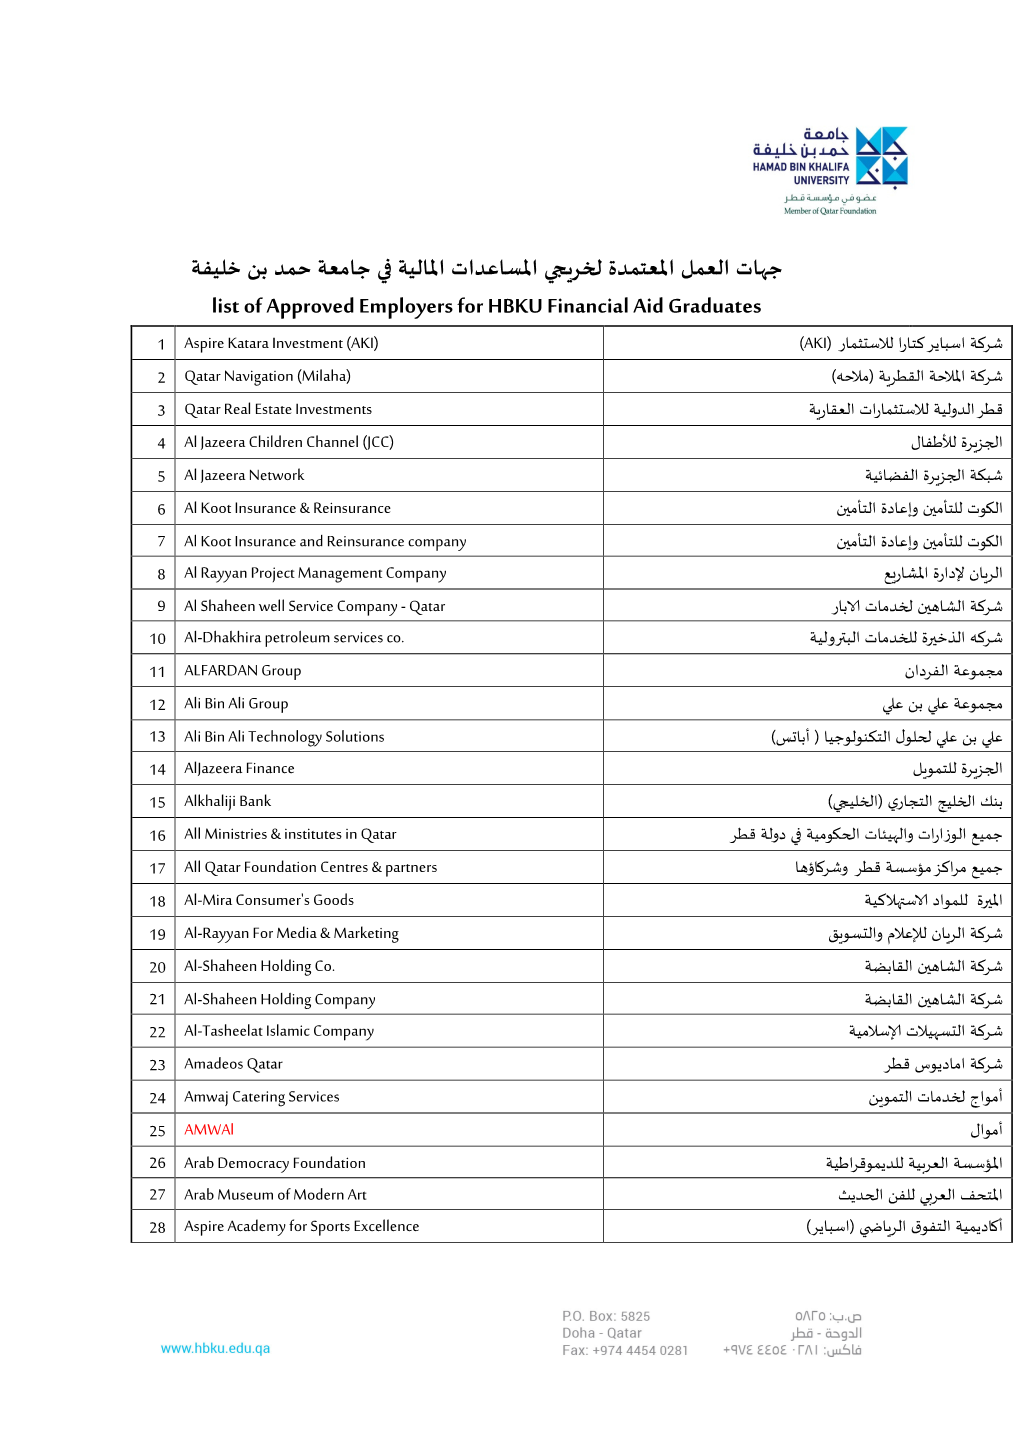 List of Approved Employers for HBKU Financial Aid Graduates